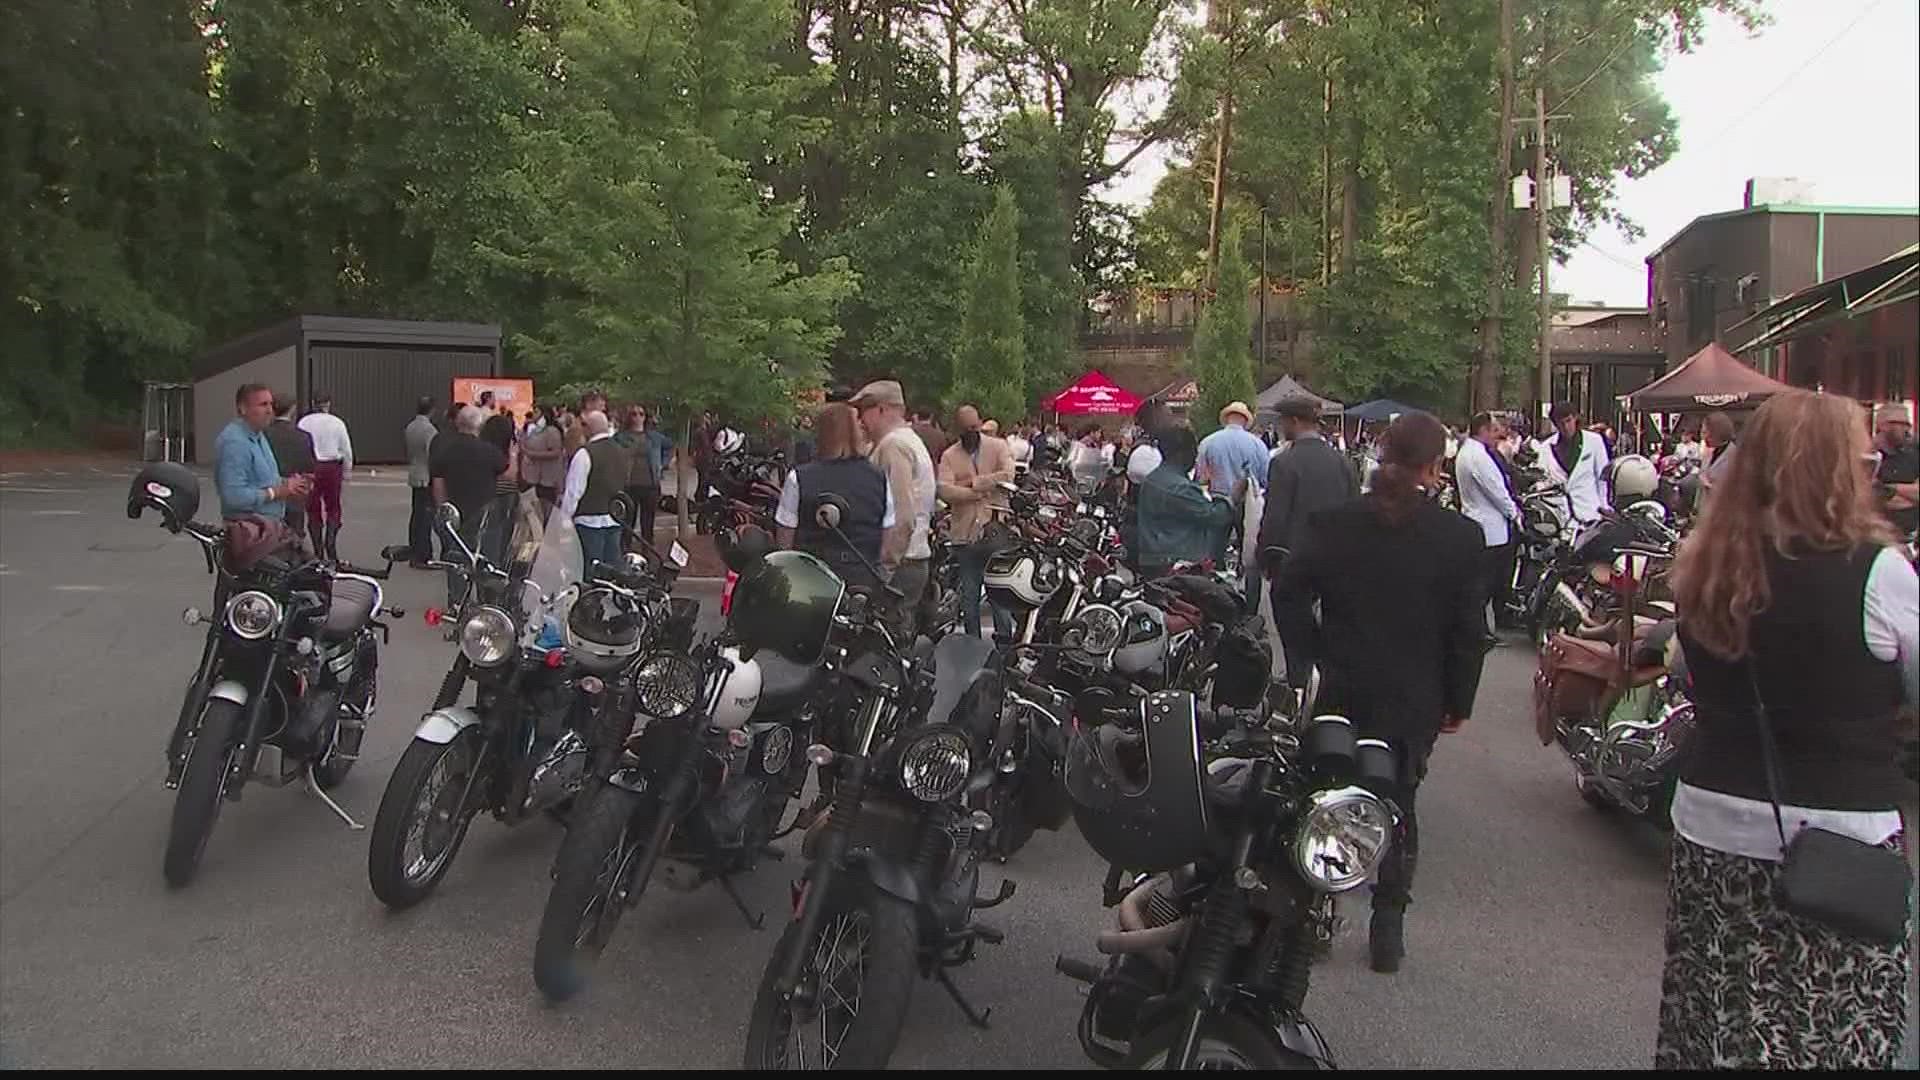 The ride was part of a nationwide fundraiser to raise money for Prostate Cancer research and men's mental health.